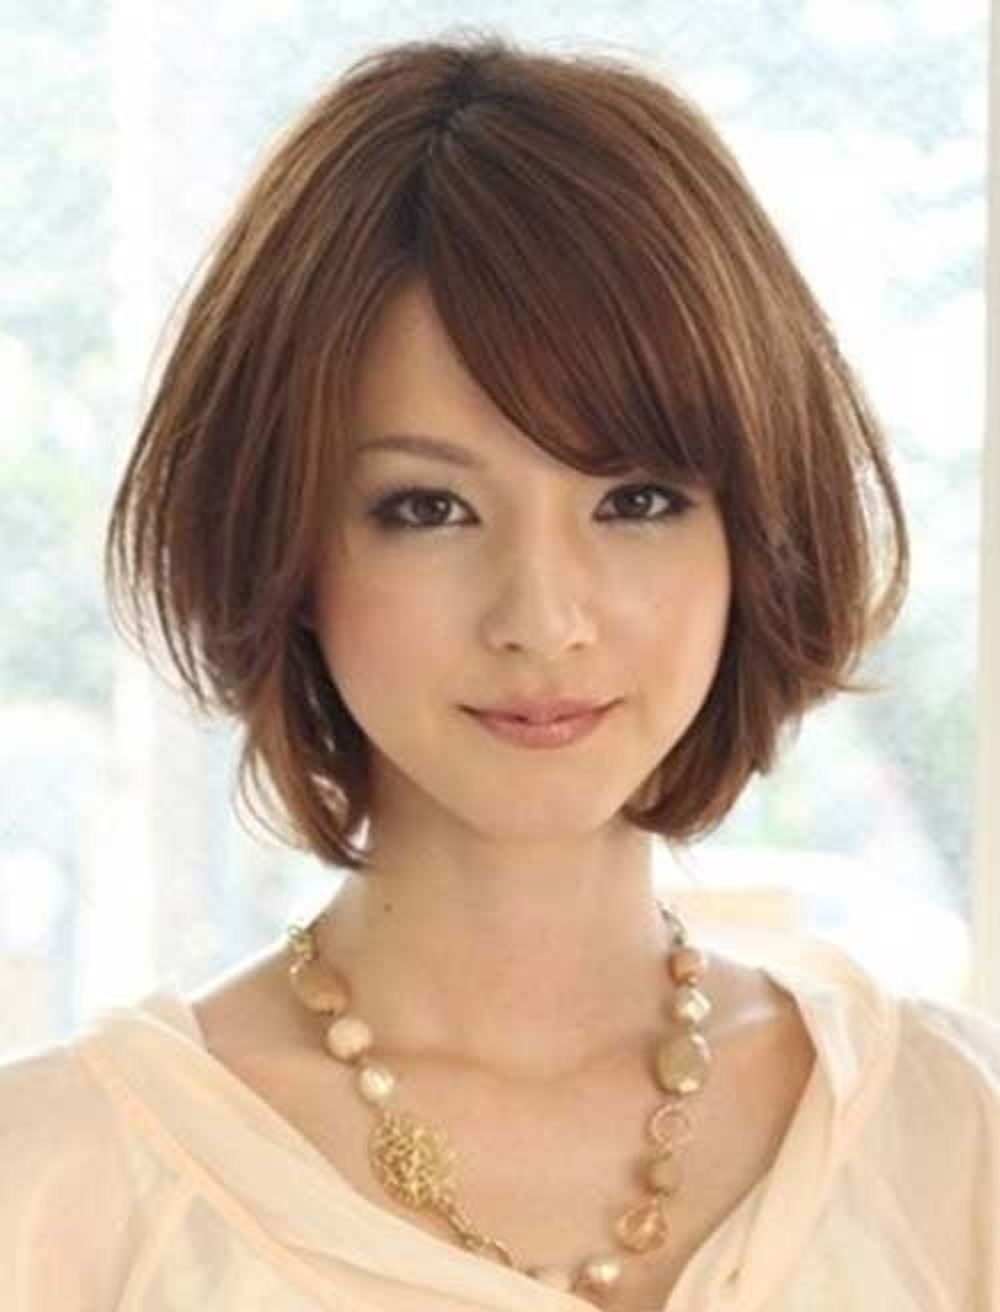 Short Hairstyles For Asian Women 2018 2019 In 2019 | Hair Cuts regarding Superb Asian Short Hairstyles 2018